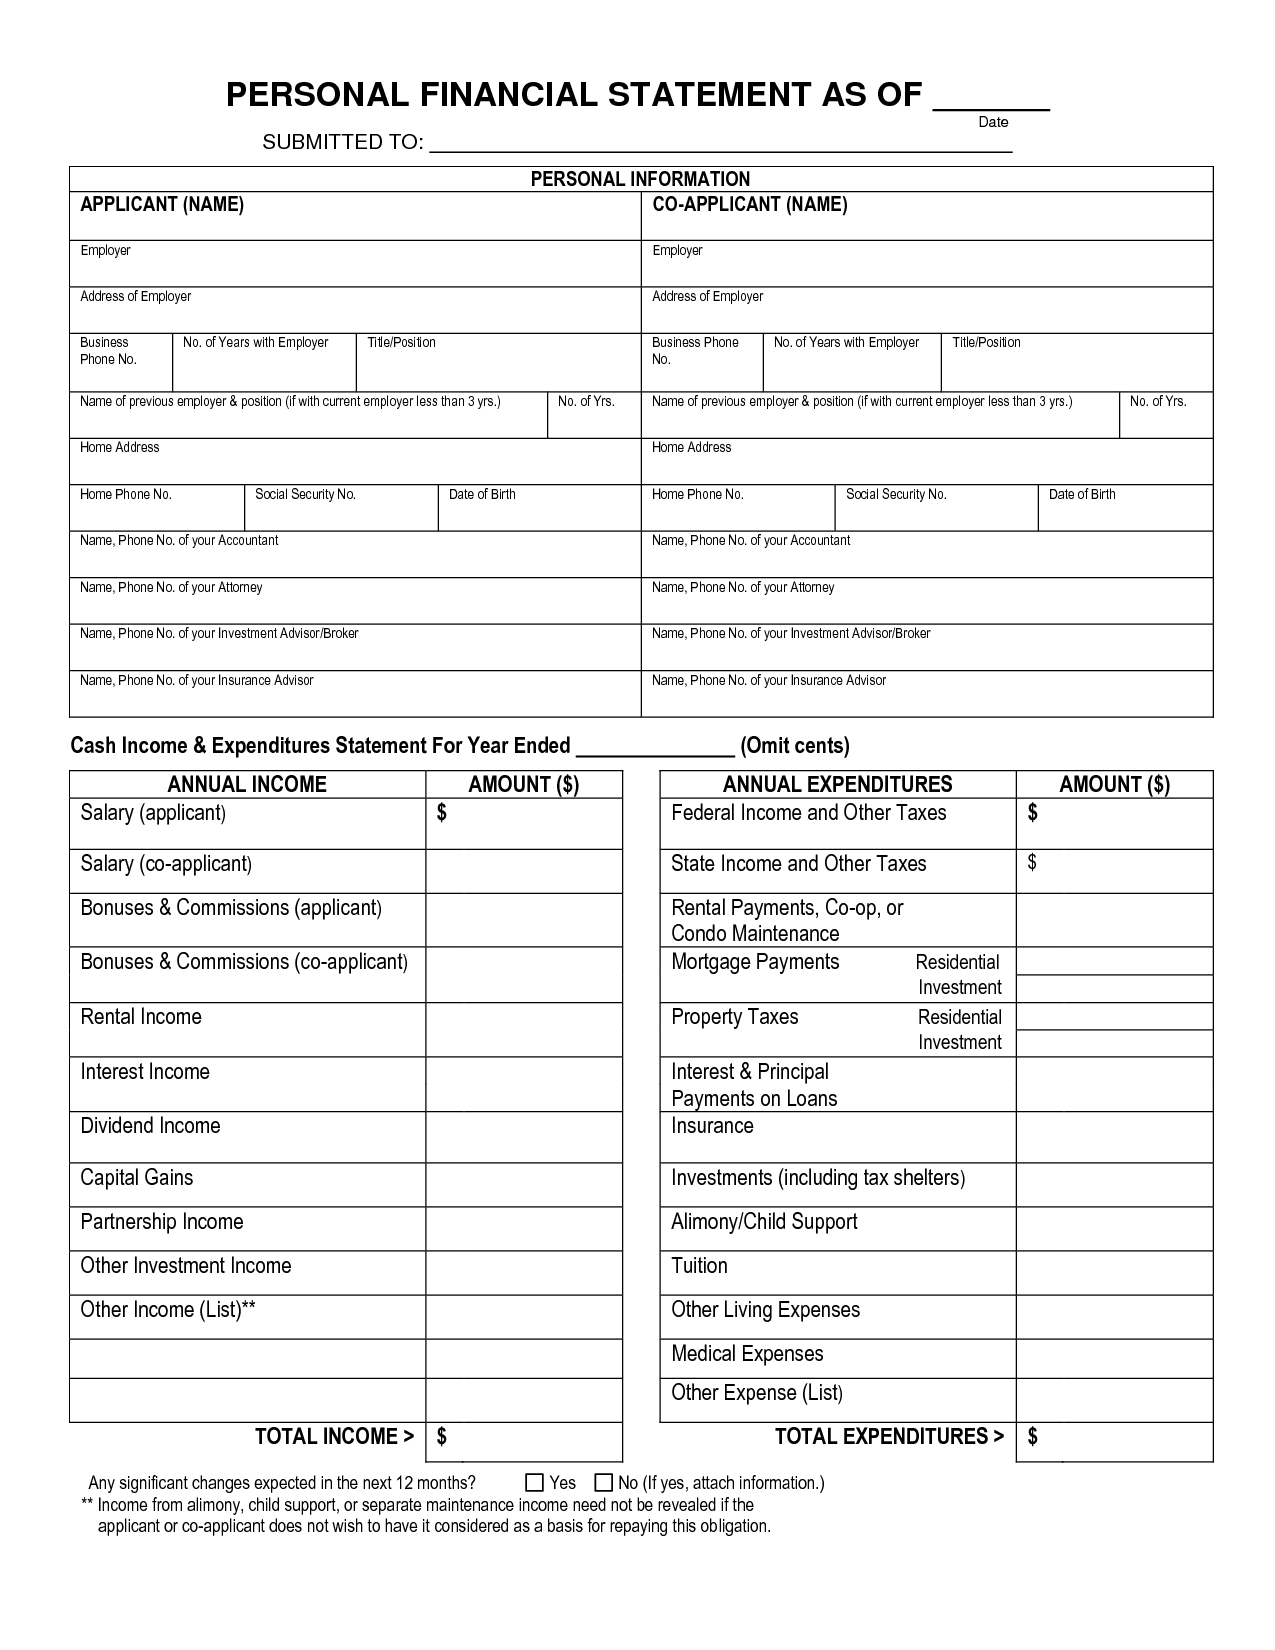 Free Printable Personal Financial Statement | Blank Personal With Regard To Blank Personal Financial Statement Template